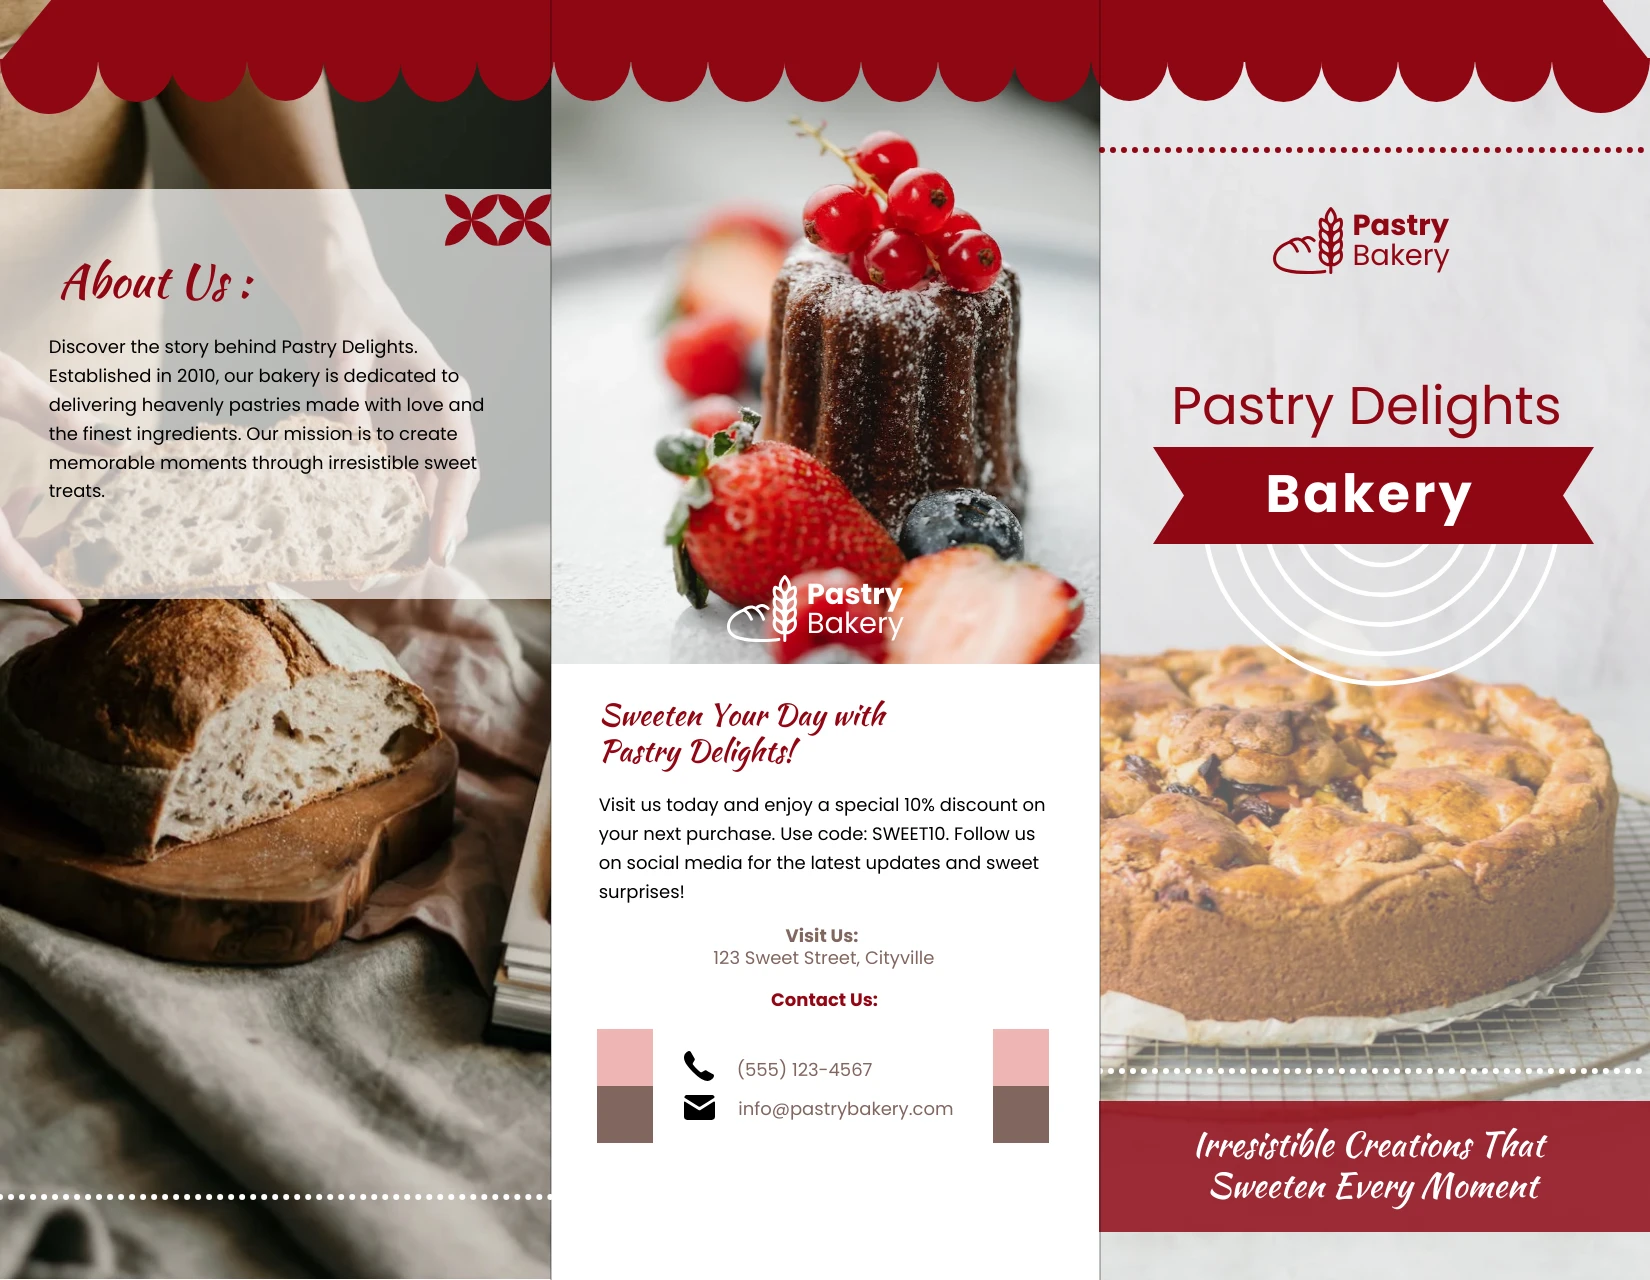 Discounted bakery delights